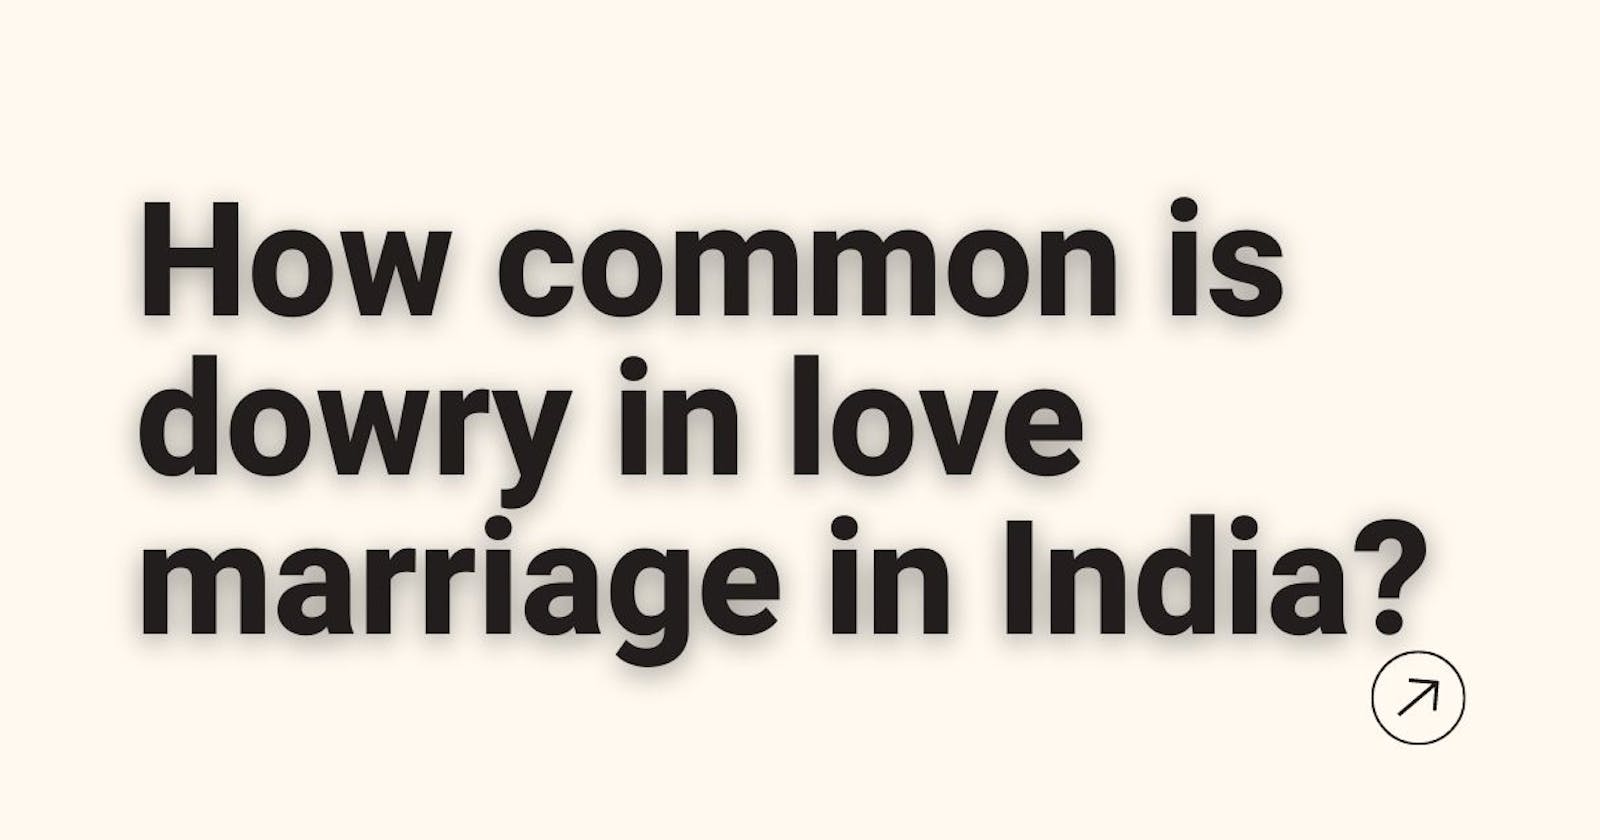 How common is dowry in love marriage in India?